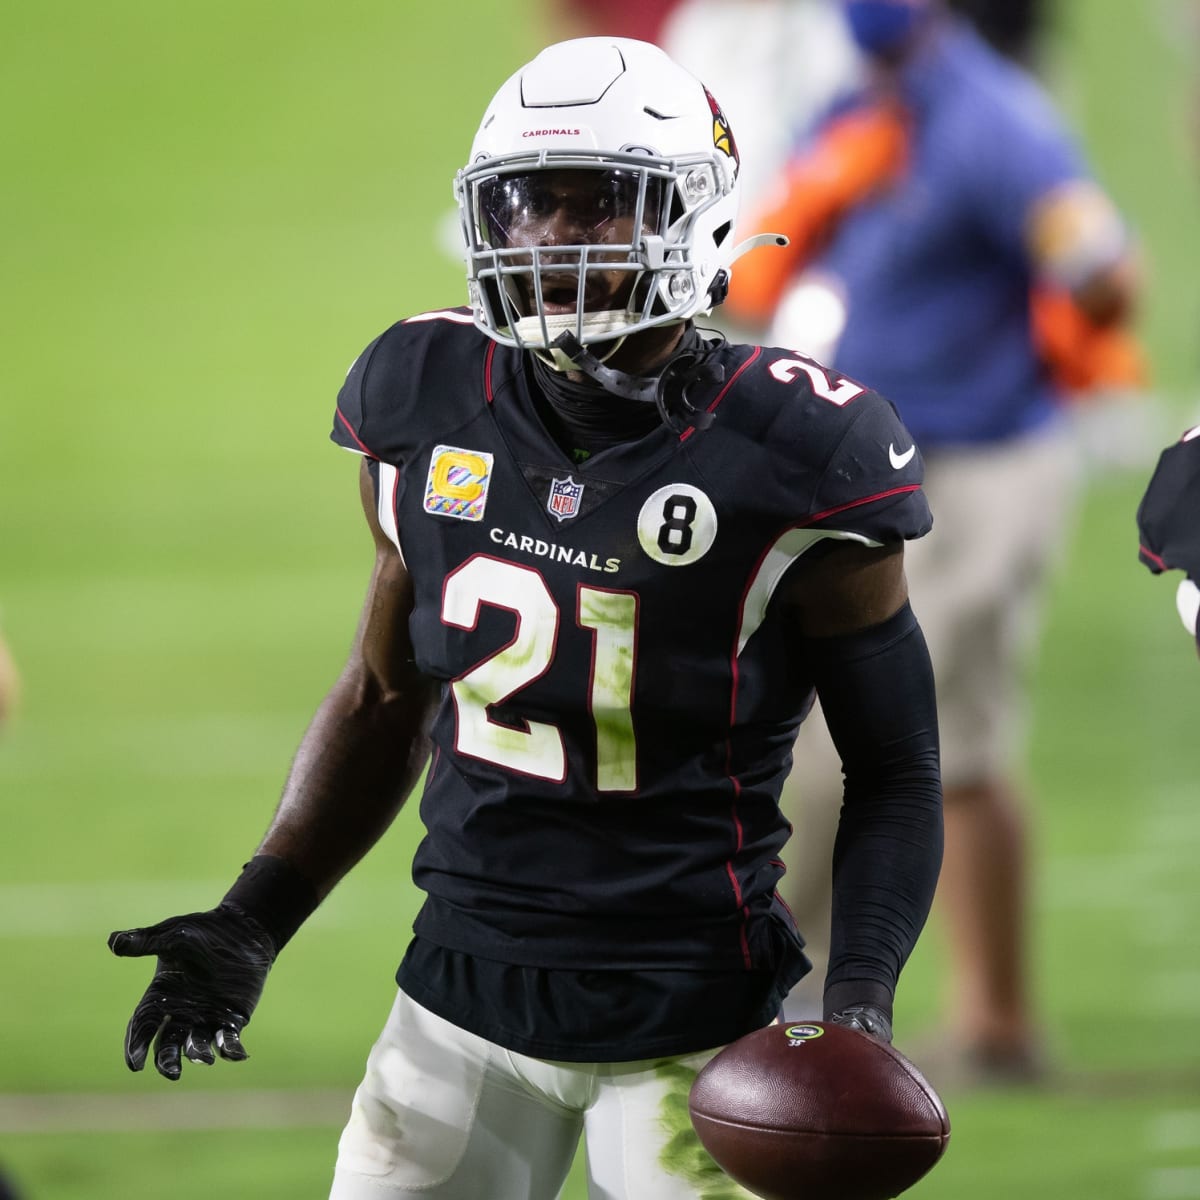 Cardinals star CB Patrick Peterson set to play out contract